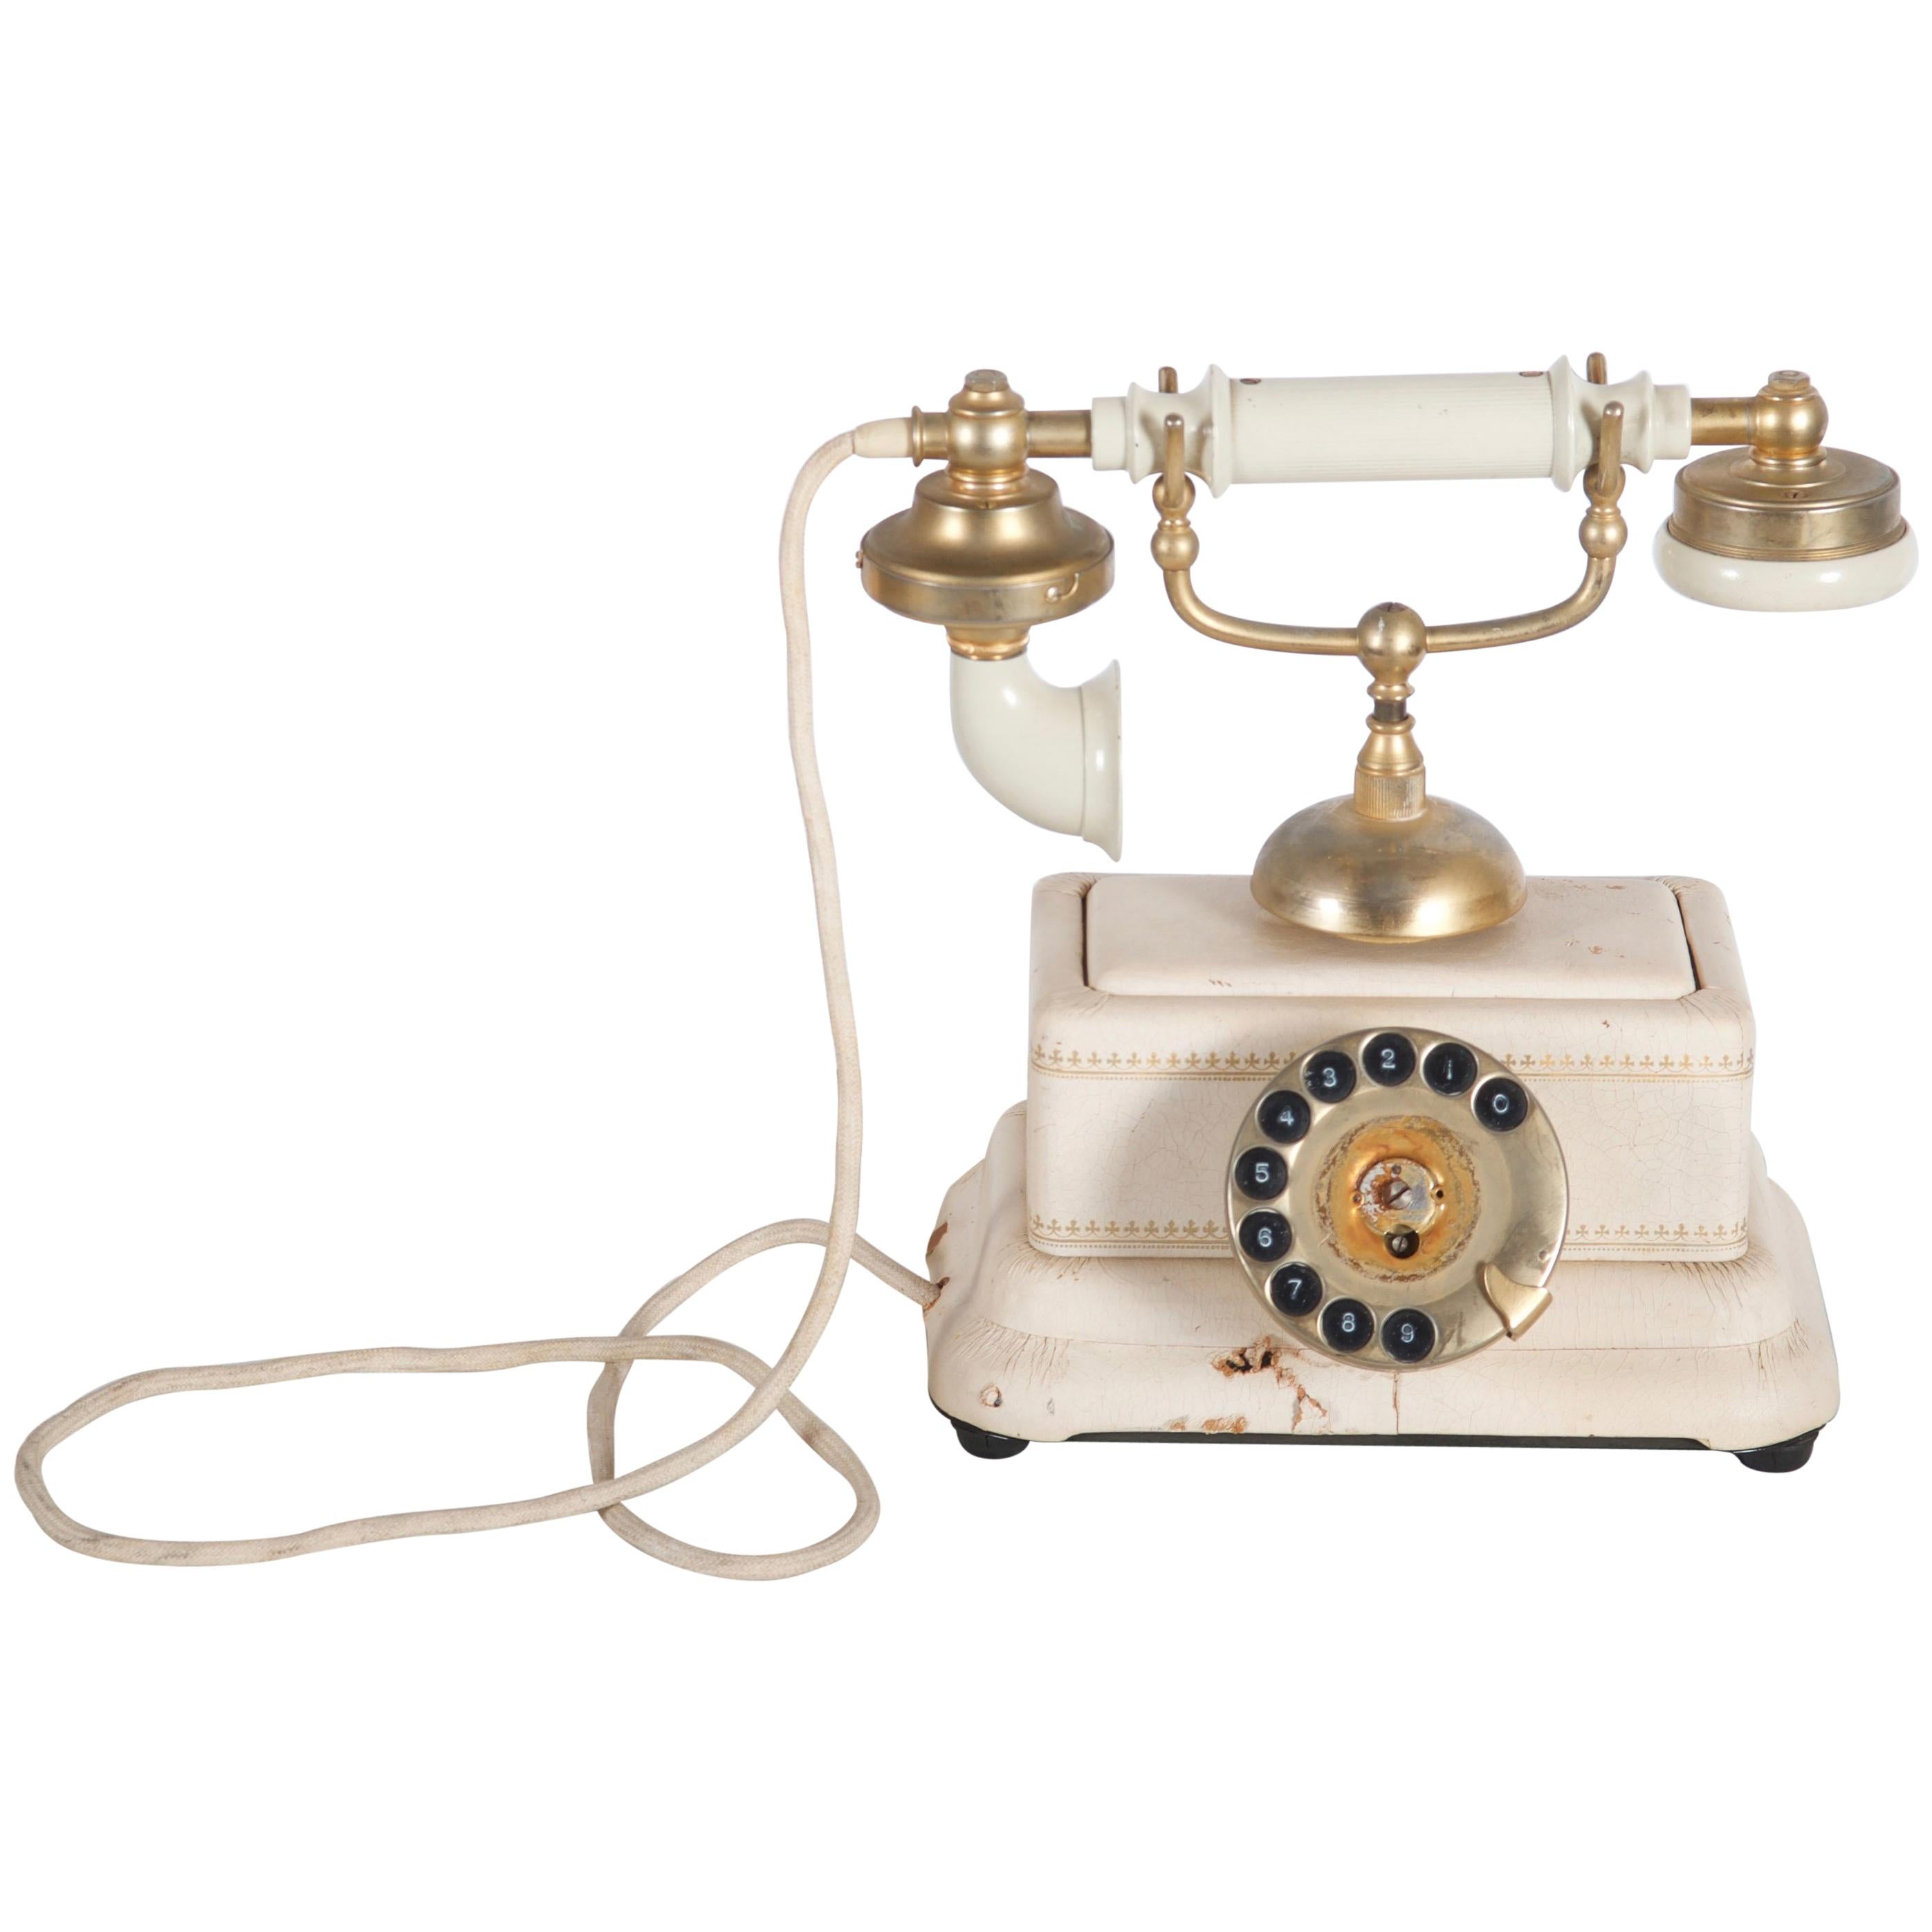 Danish Bakelite Table Phone from the 1940s For Sale